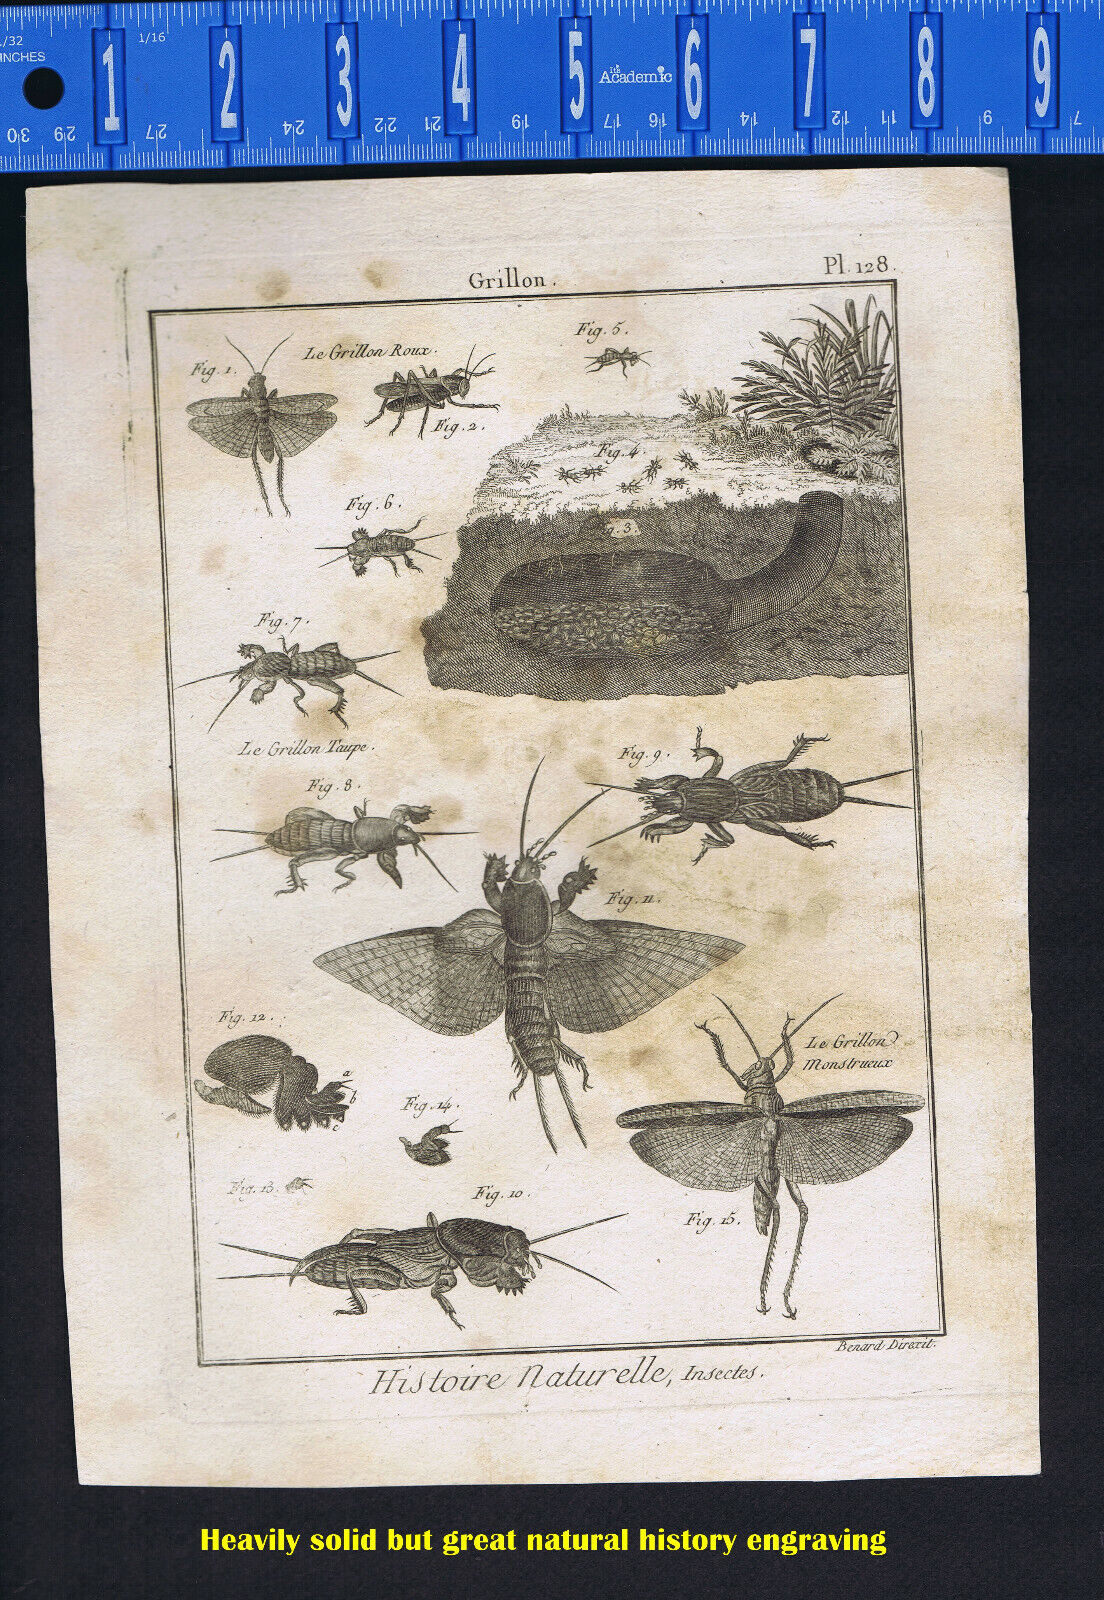 Grillon, Crickets in Natural Habitat - 1797 Panckoucke Insect Engraving 